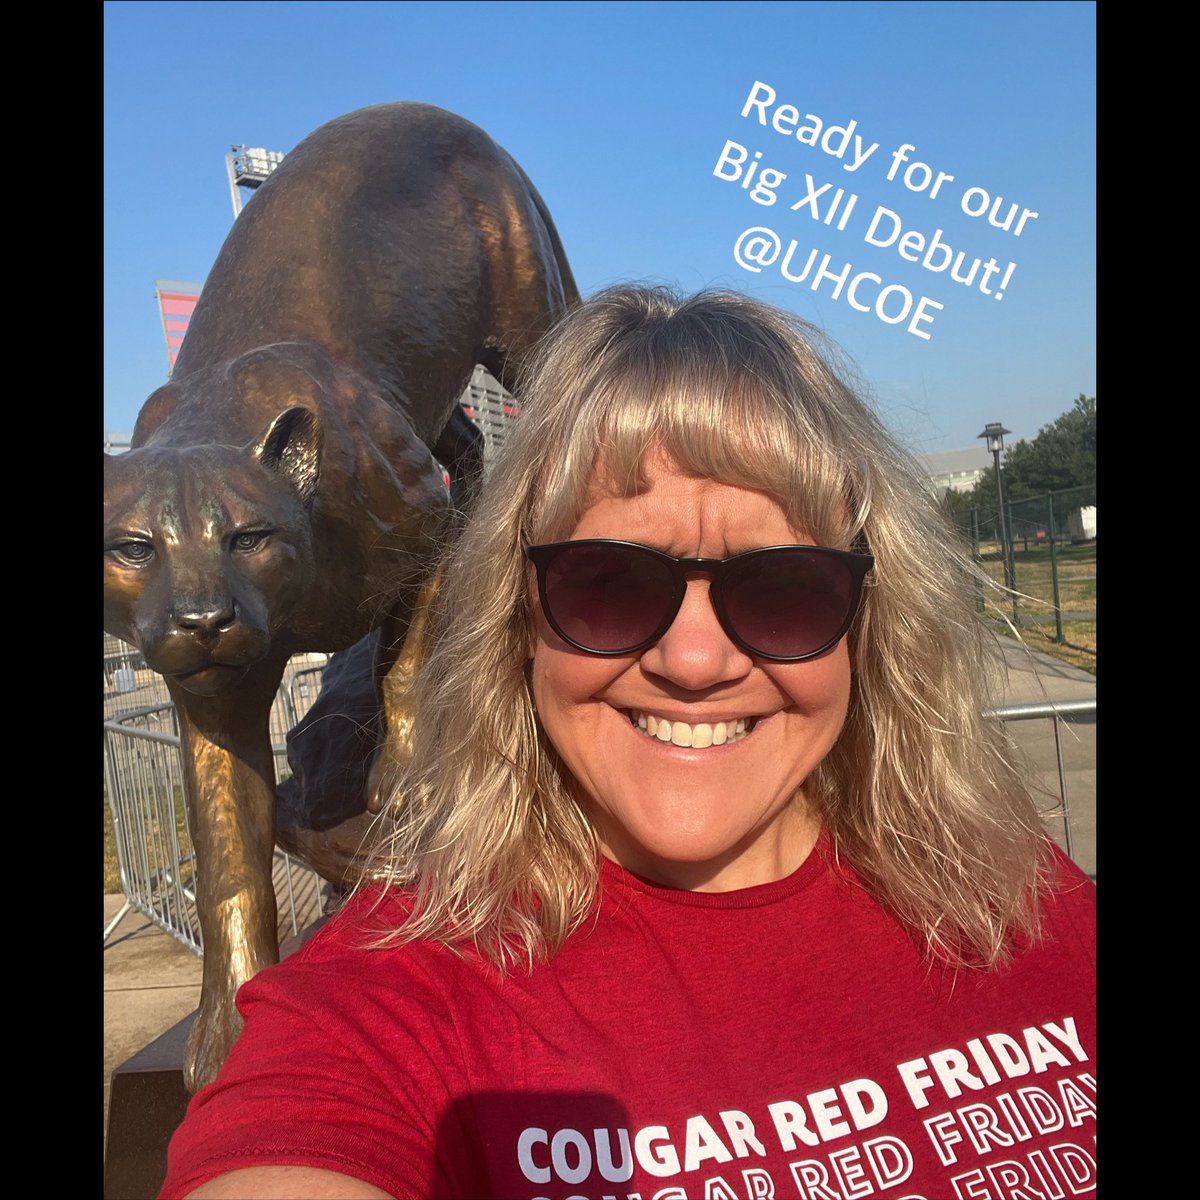 Shasta and I are ready for our Big XII football debut! Excited for my first game as a Cougar and thankful to @uhcoe for a great start to the year! #cougarredfriday #GoCoogs